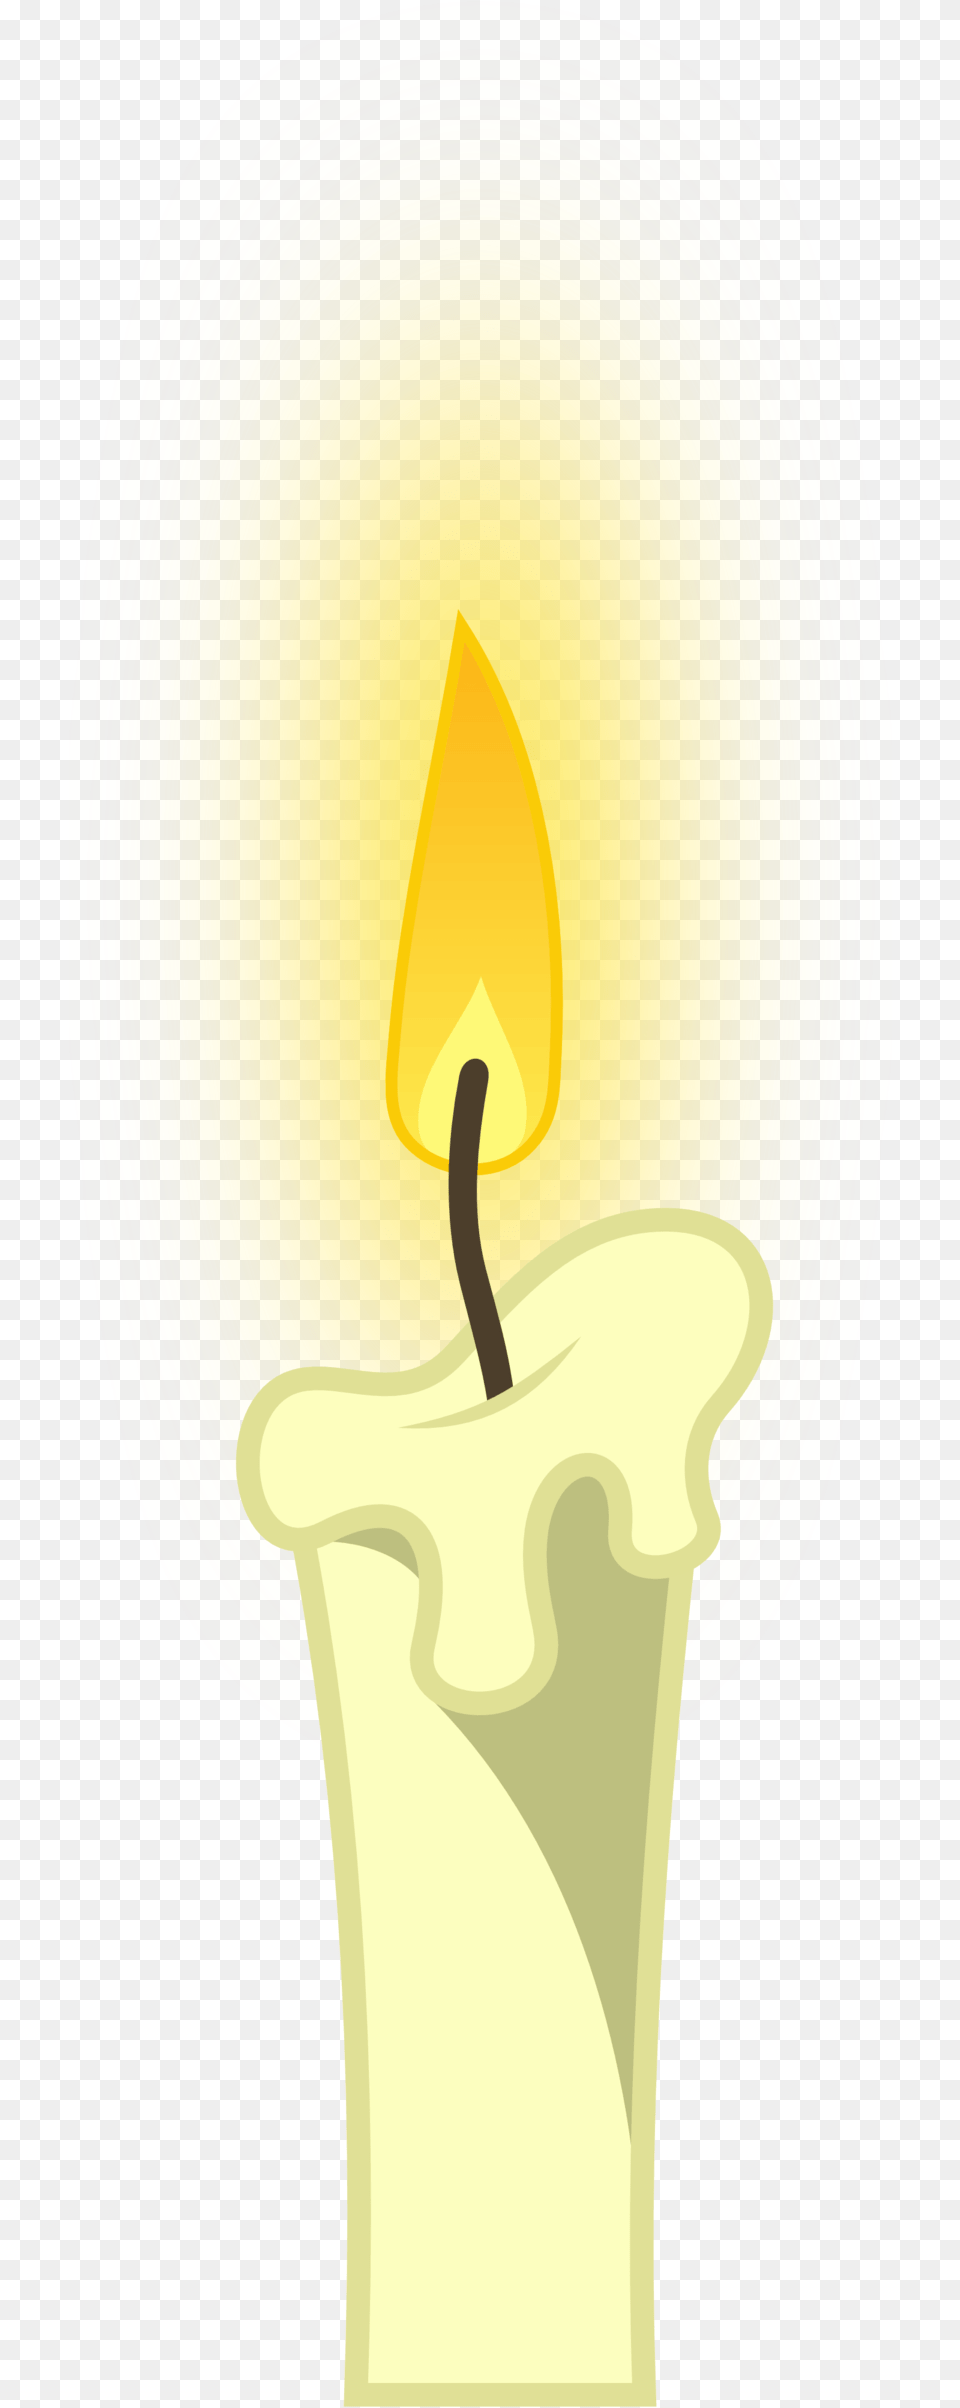 Candle Vector Cartoon White Candle Cartoon, Fire, Flame Free Png